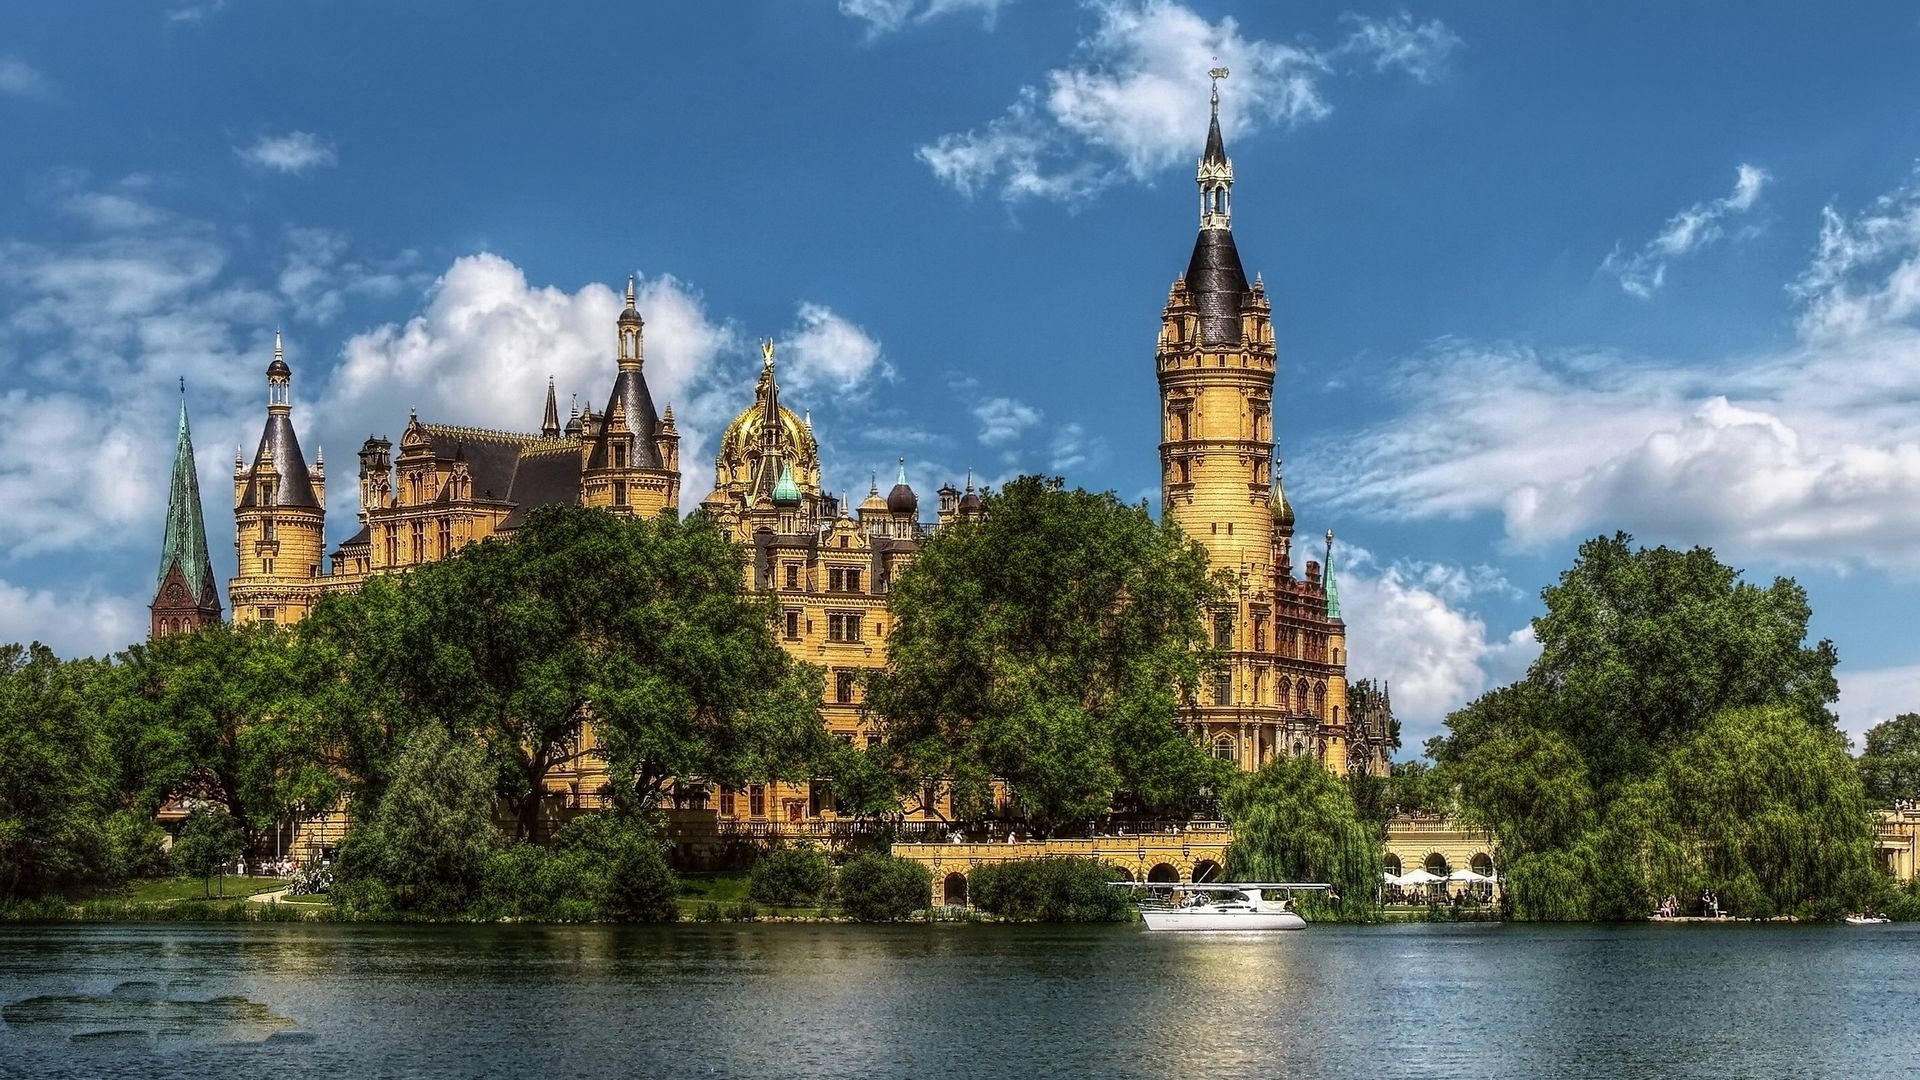 Castle: Schwerin Palace, The home of the dukes and grand dukes of Mecklenburg. 1920x1080 Full HD Wallpaper.